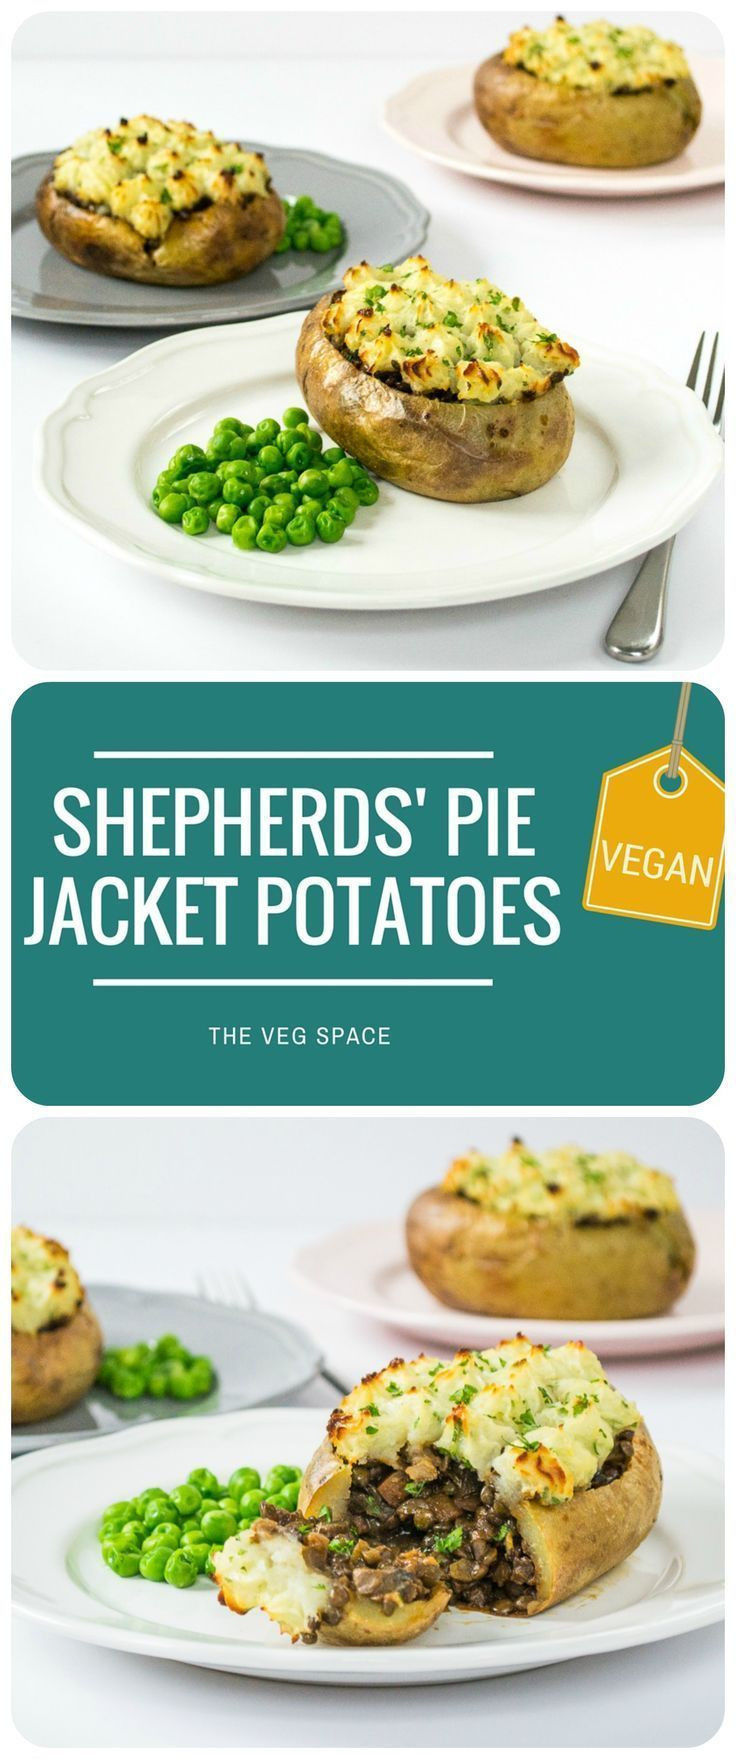 Great Vegetarian Recipes
 These Veggie Shepherds Pie Jacket Potatoes are a